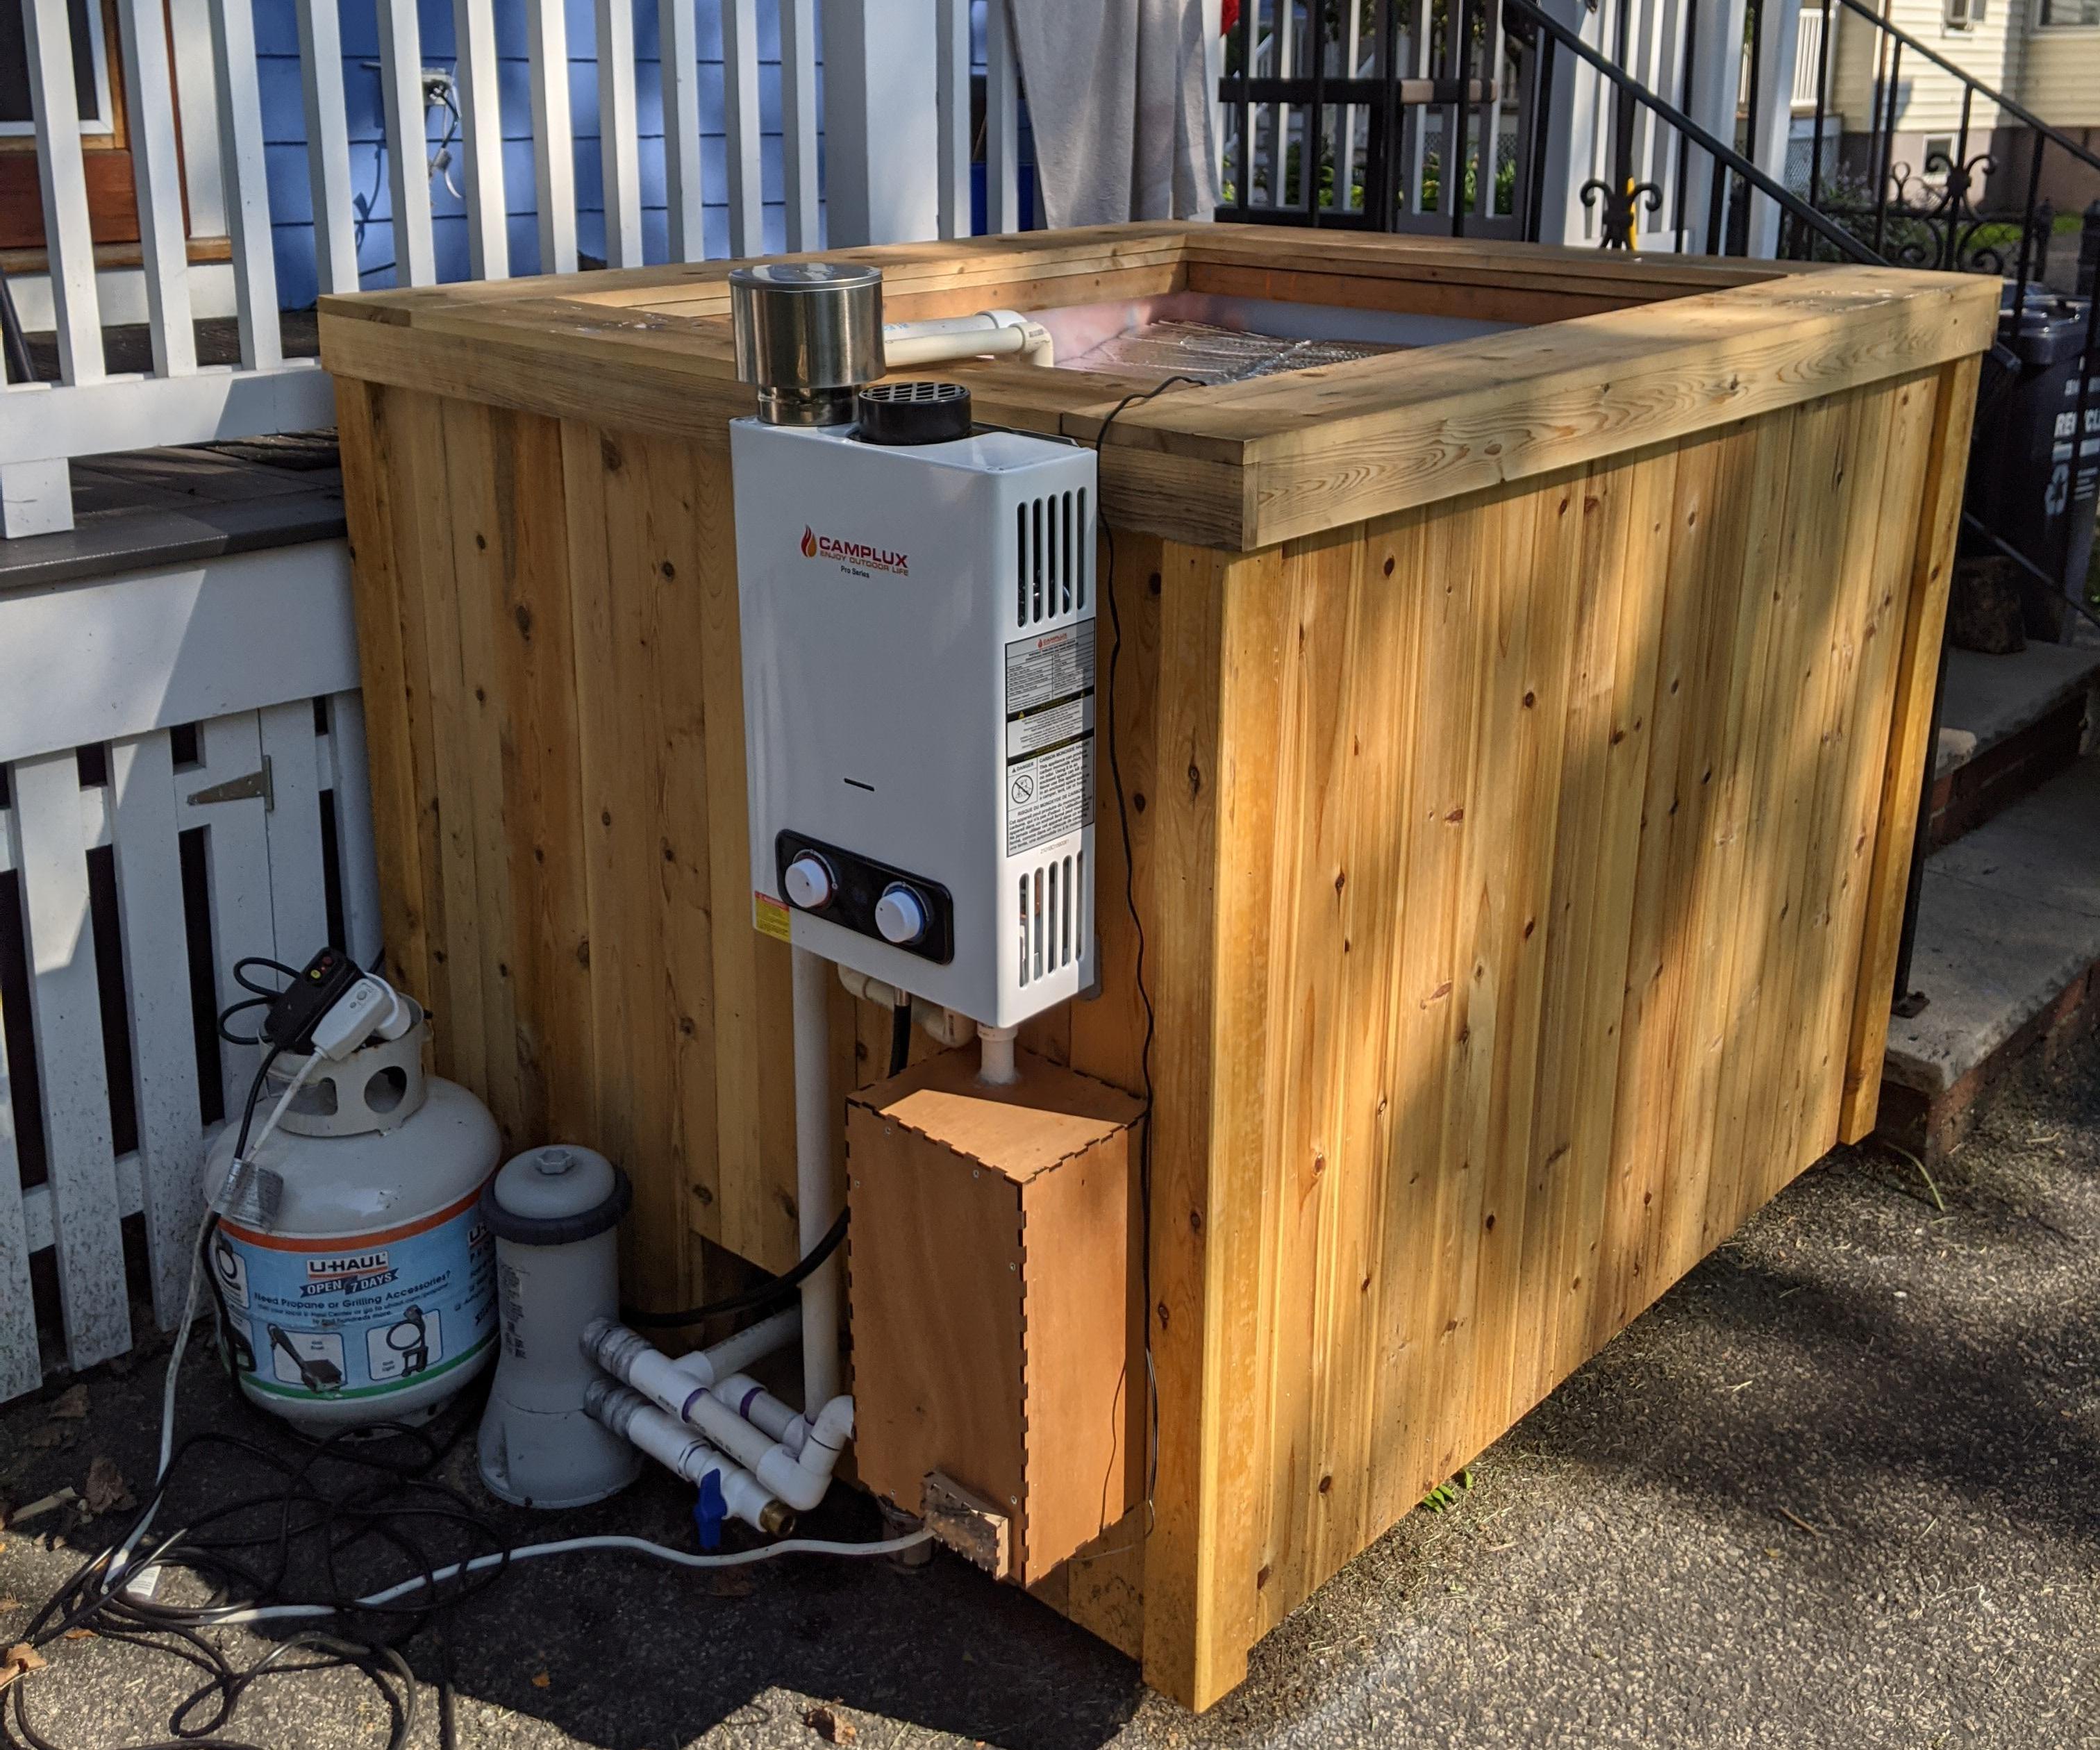 Two Person Cedar Hot Tub From an IBC Tote